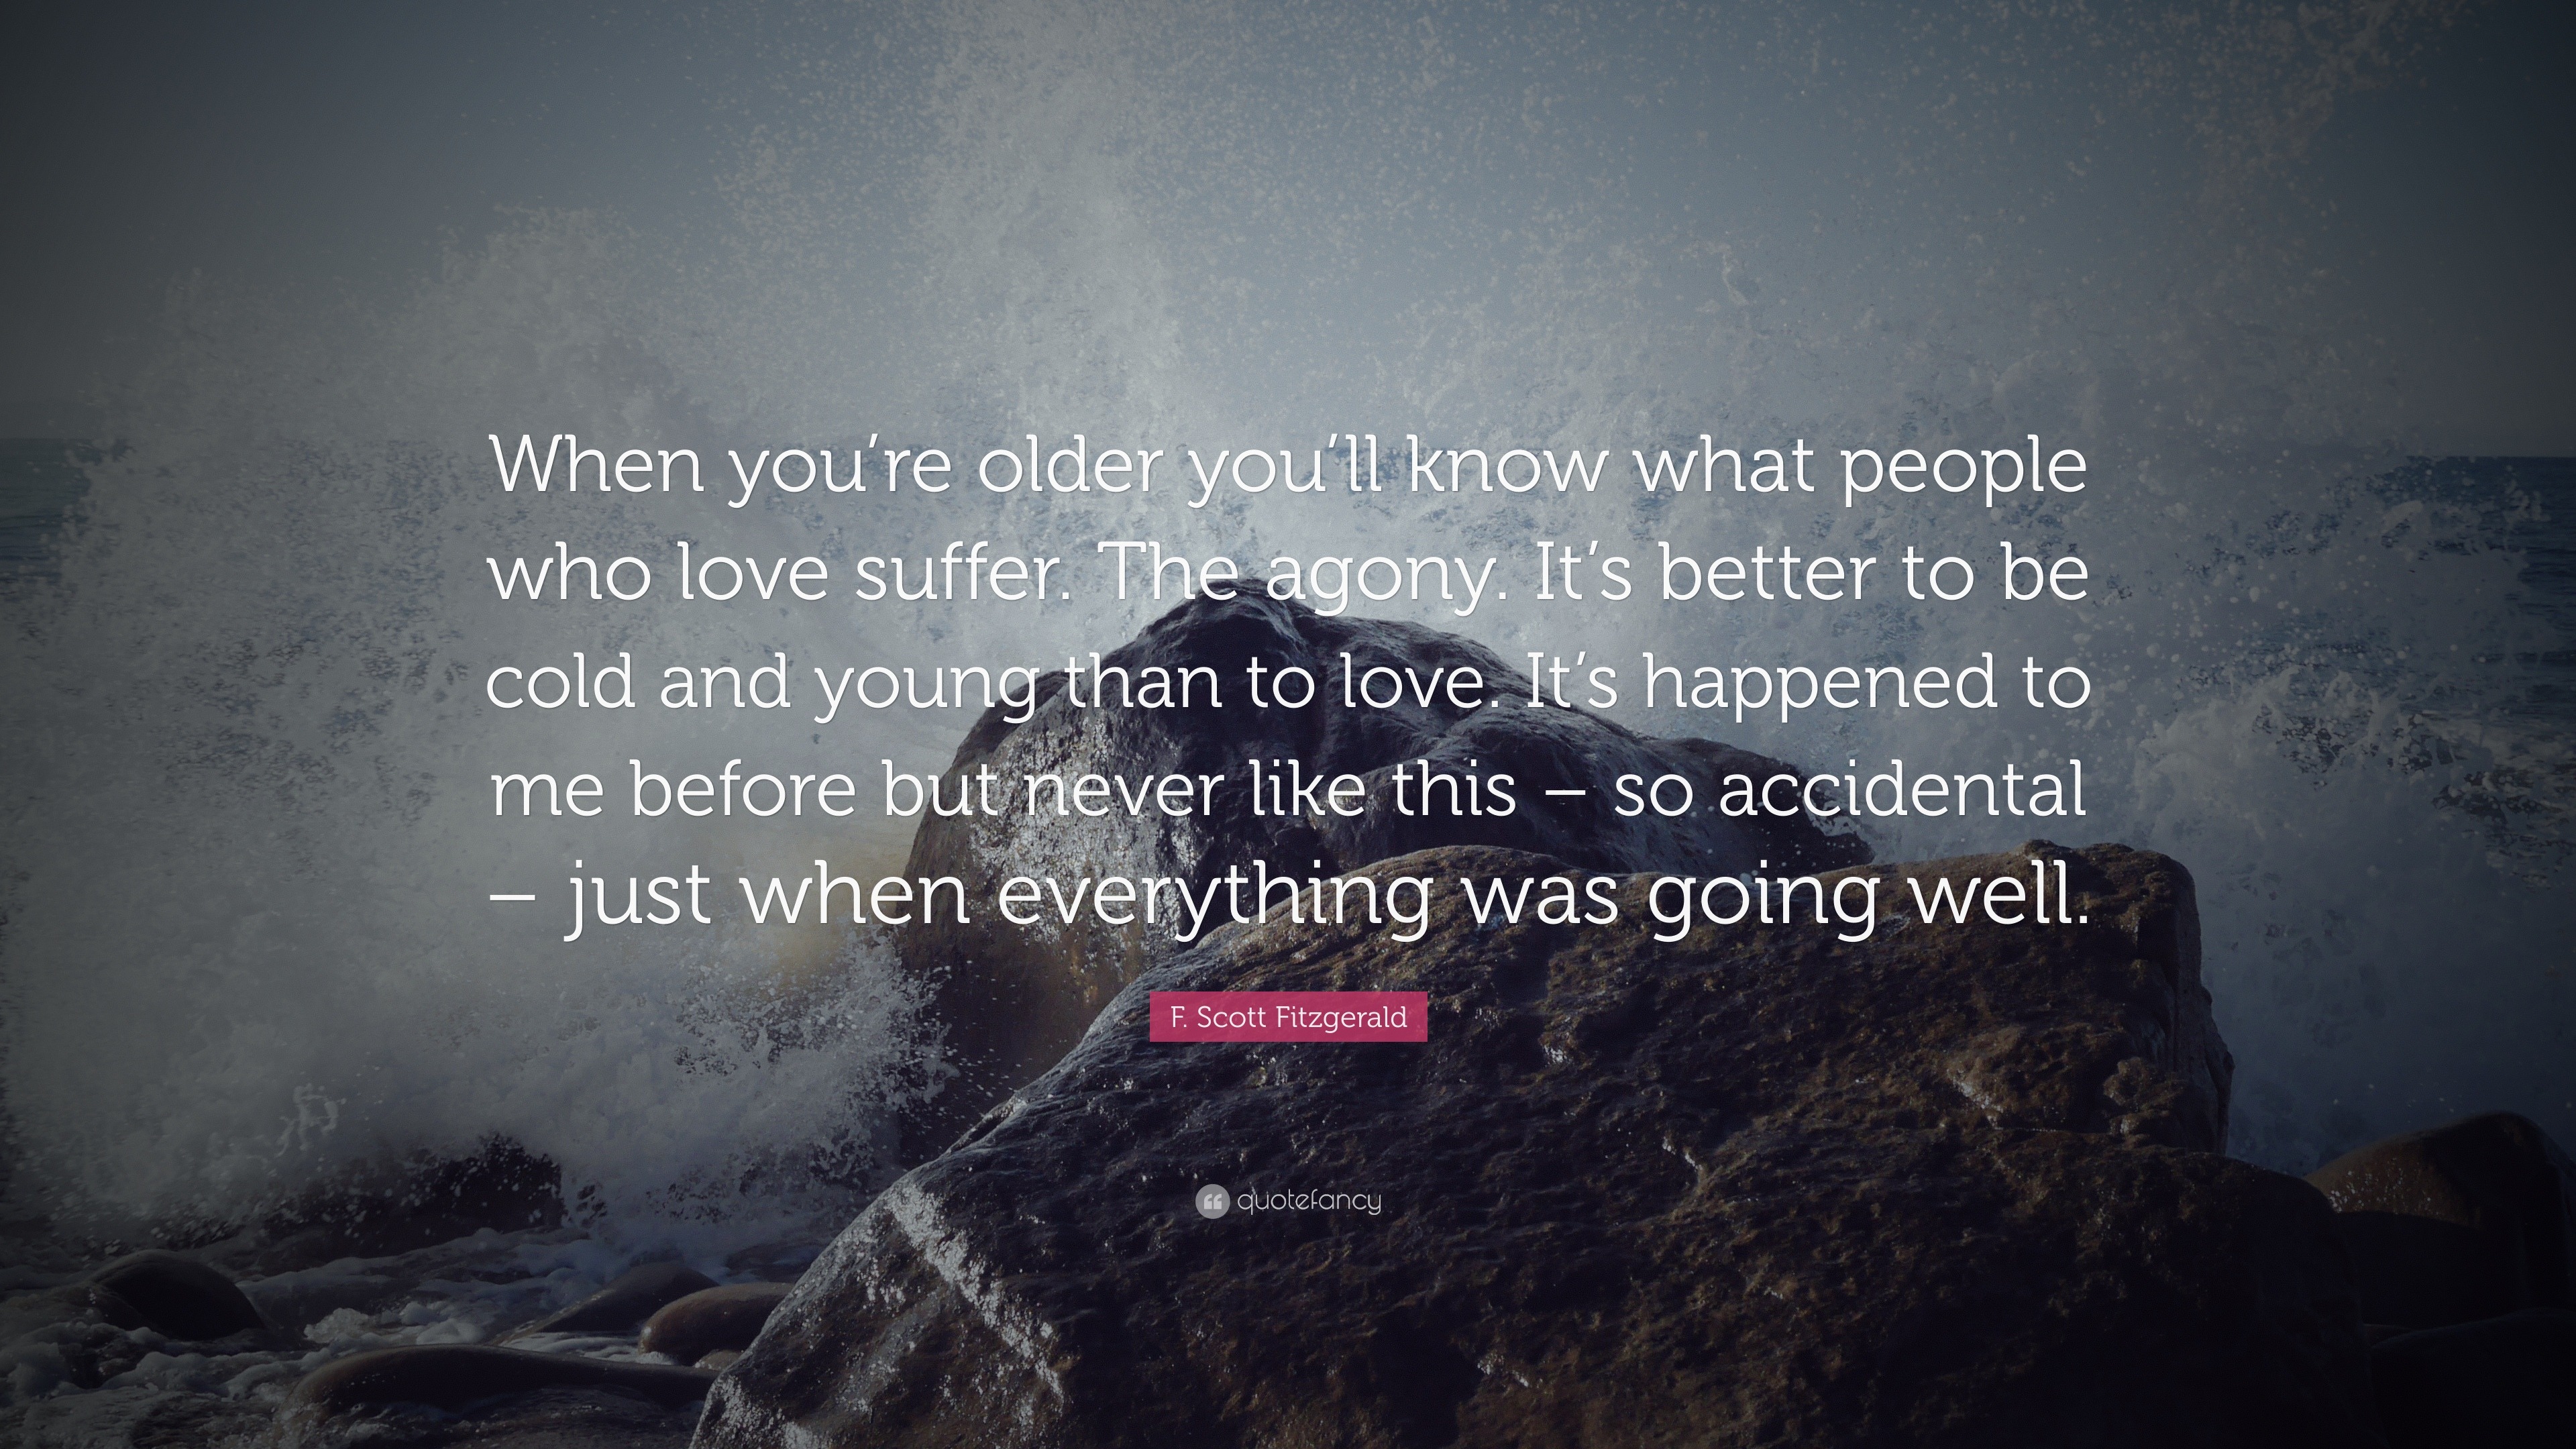 F. Scott Fitzgerald Quote: “When you’re older you’ll know what people ...